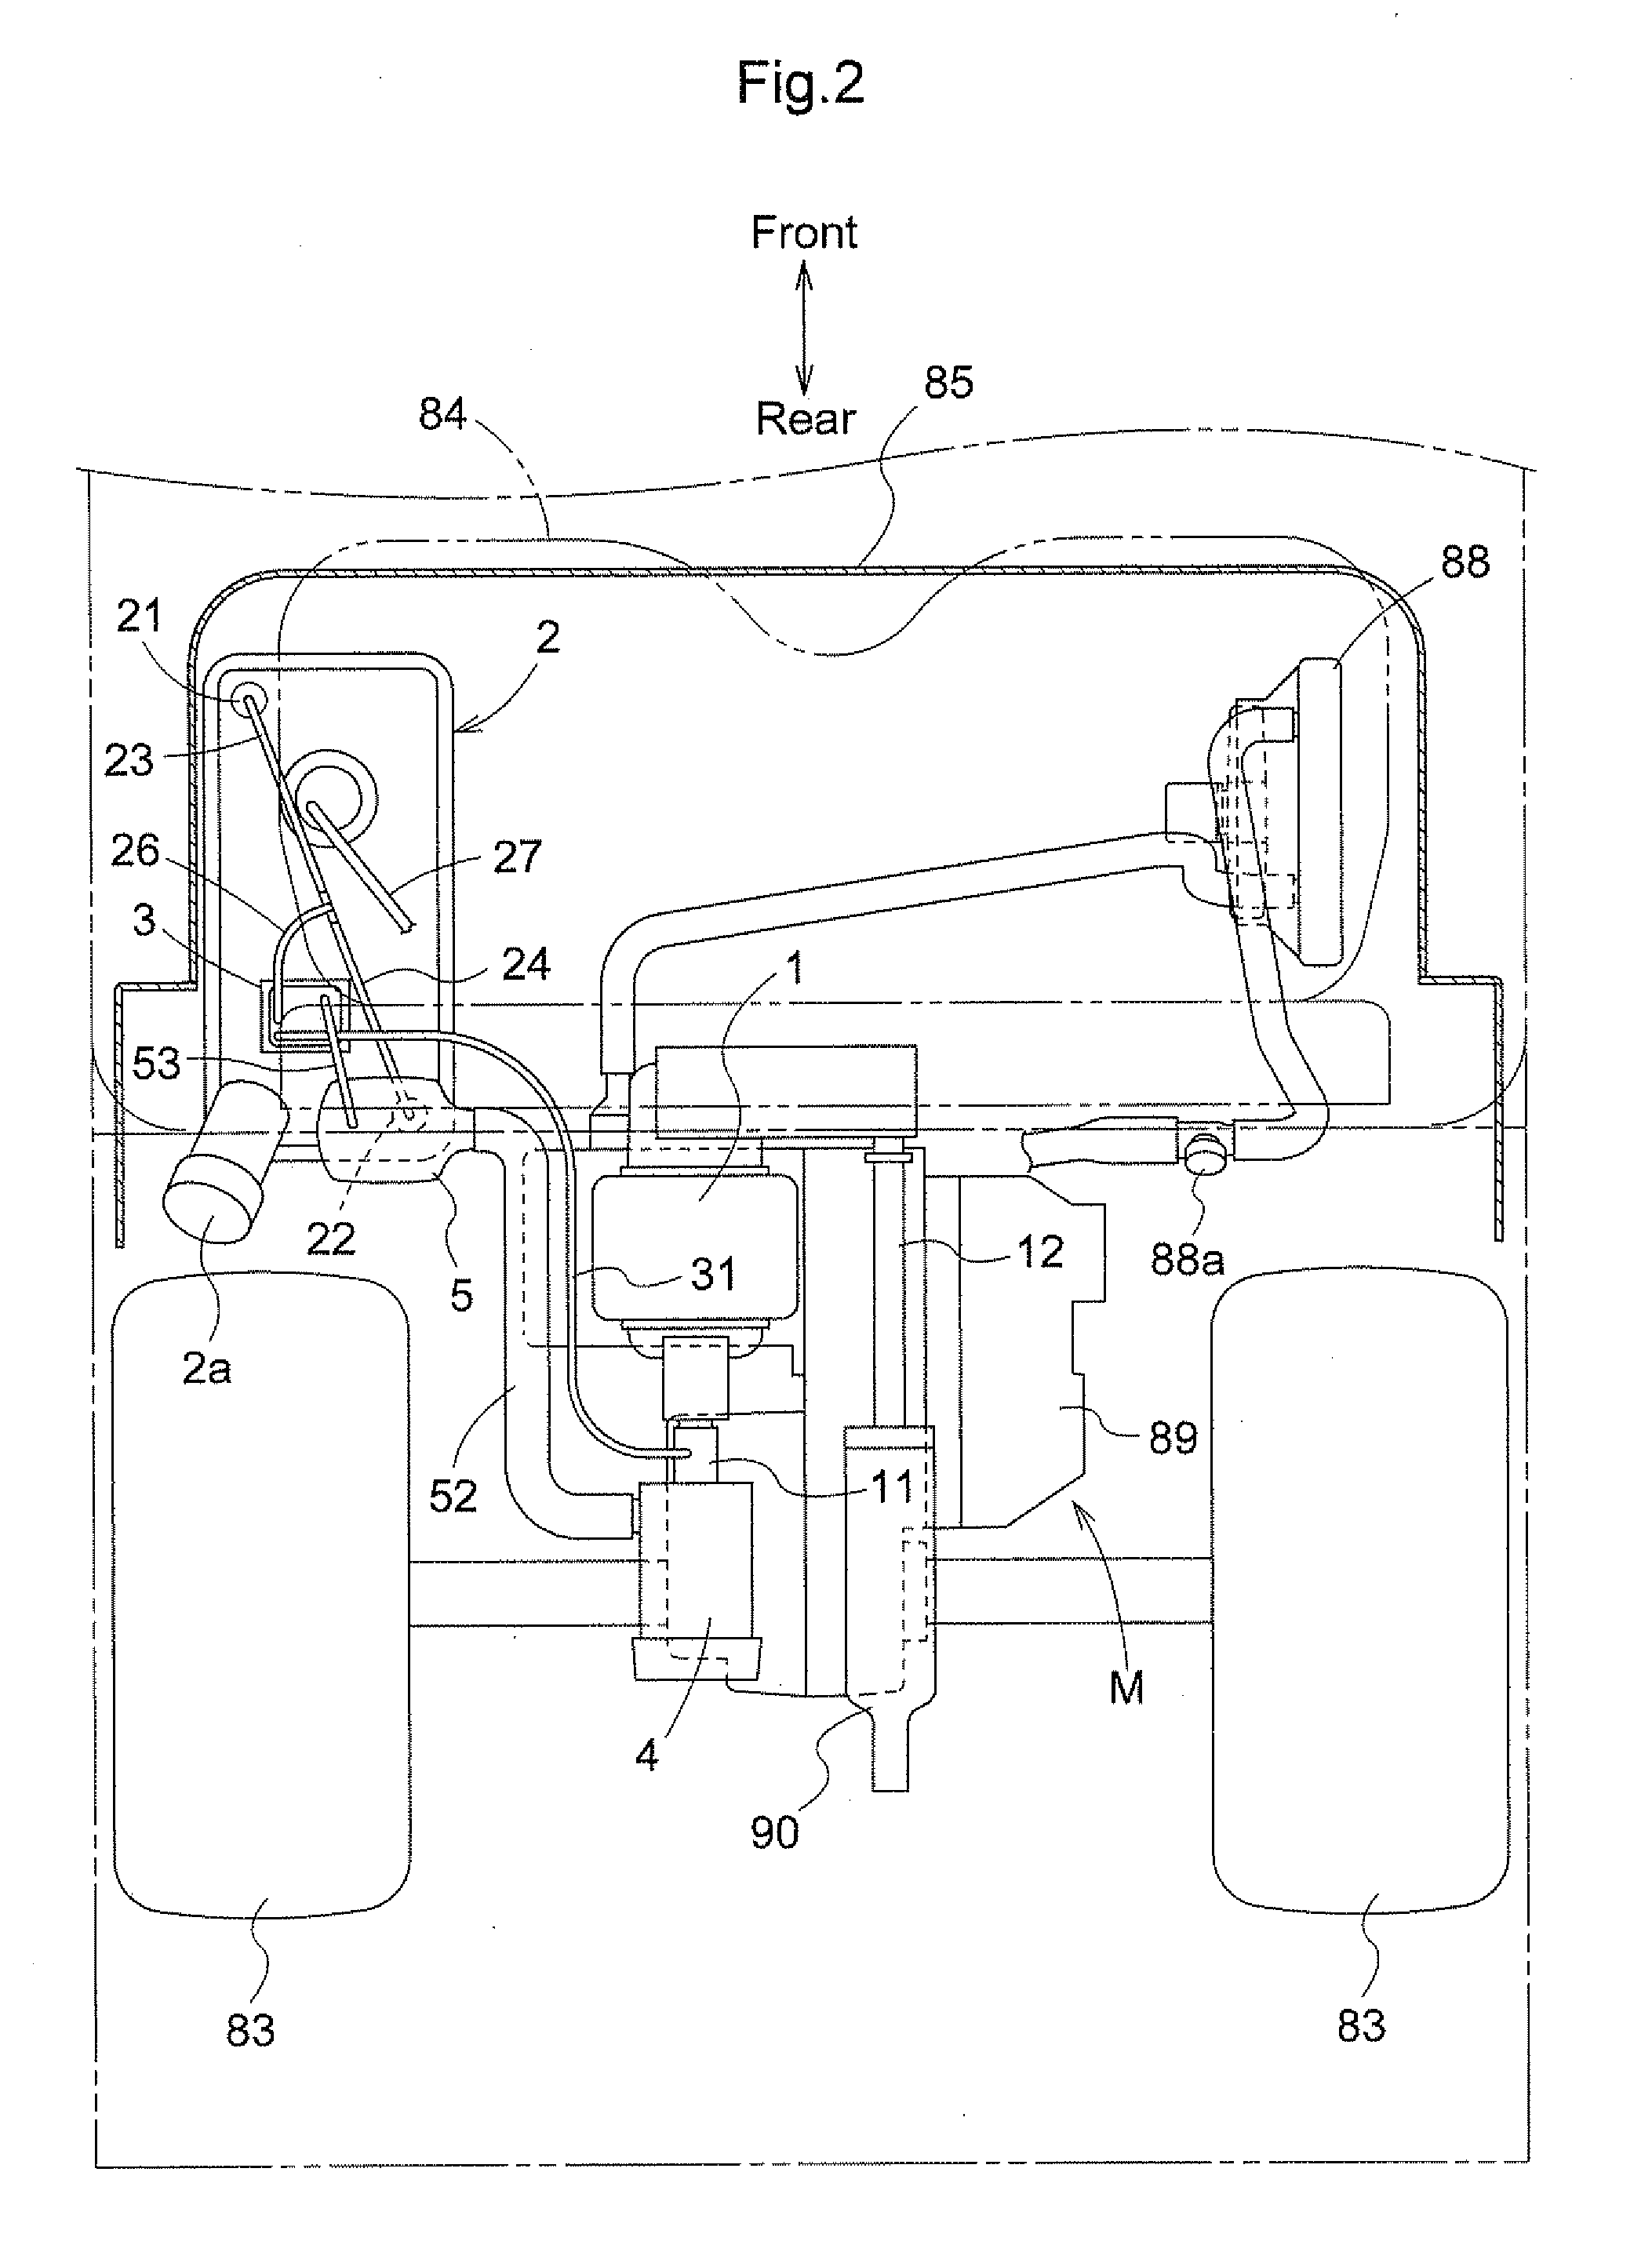 Fuel System for Vehicle with Engine